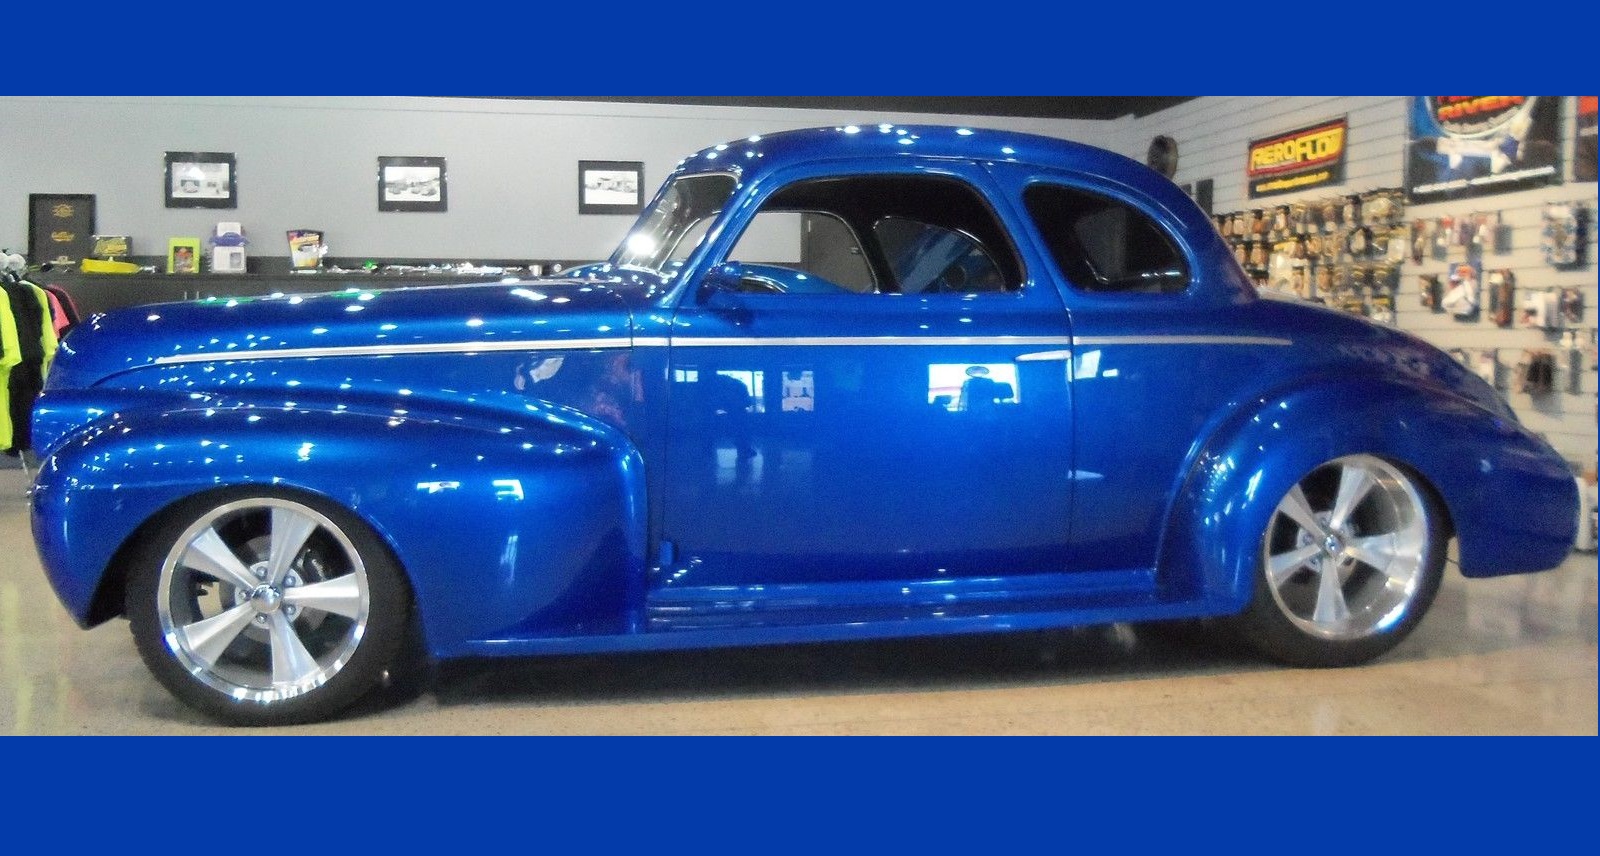 1940 Oldsmobile Club Coupe DYNAMIC COUPE 2-DOOR 1940 OLDSMOBILE CLUB COUPE RESO MOD CHEVY LS3 ENGINE TREMEC 6-SPEED TRANSMISSION